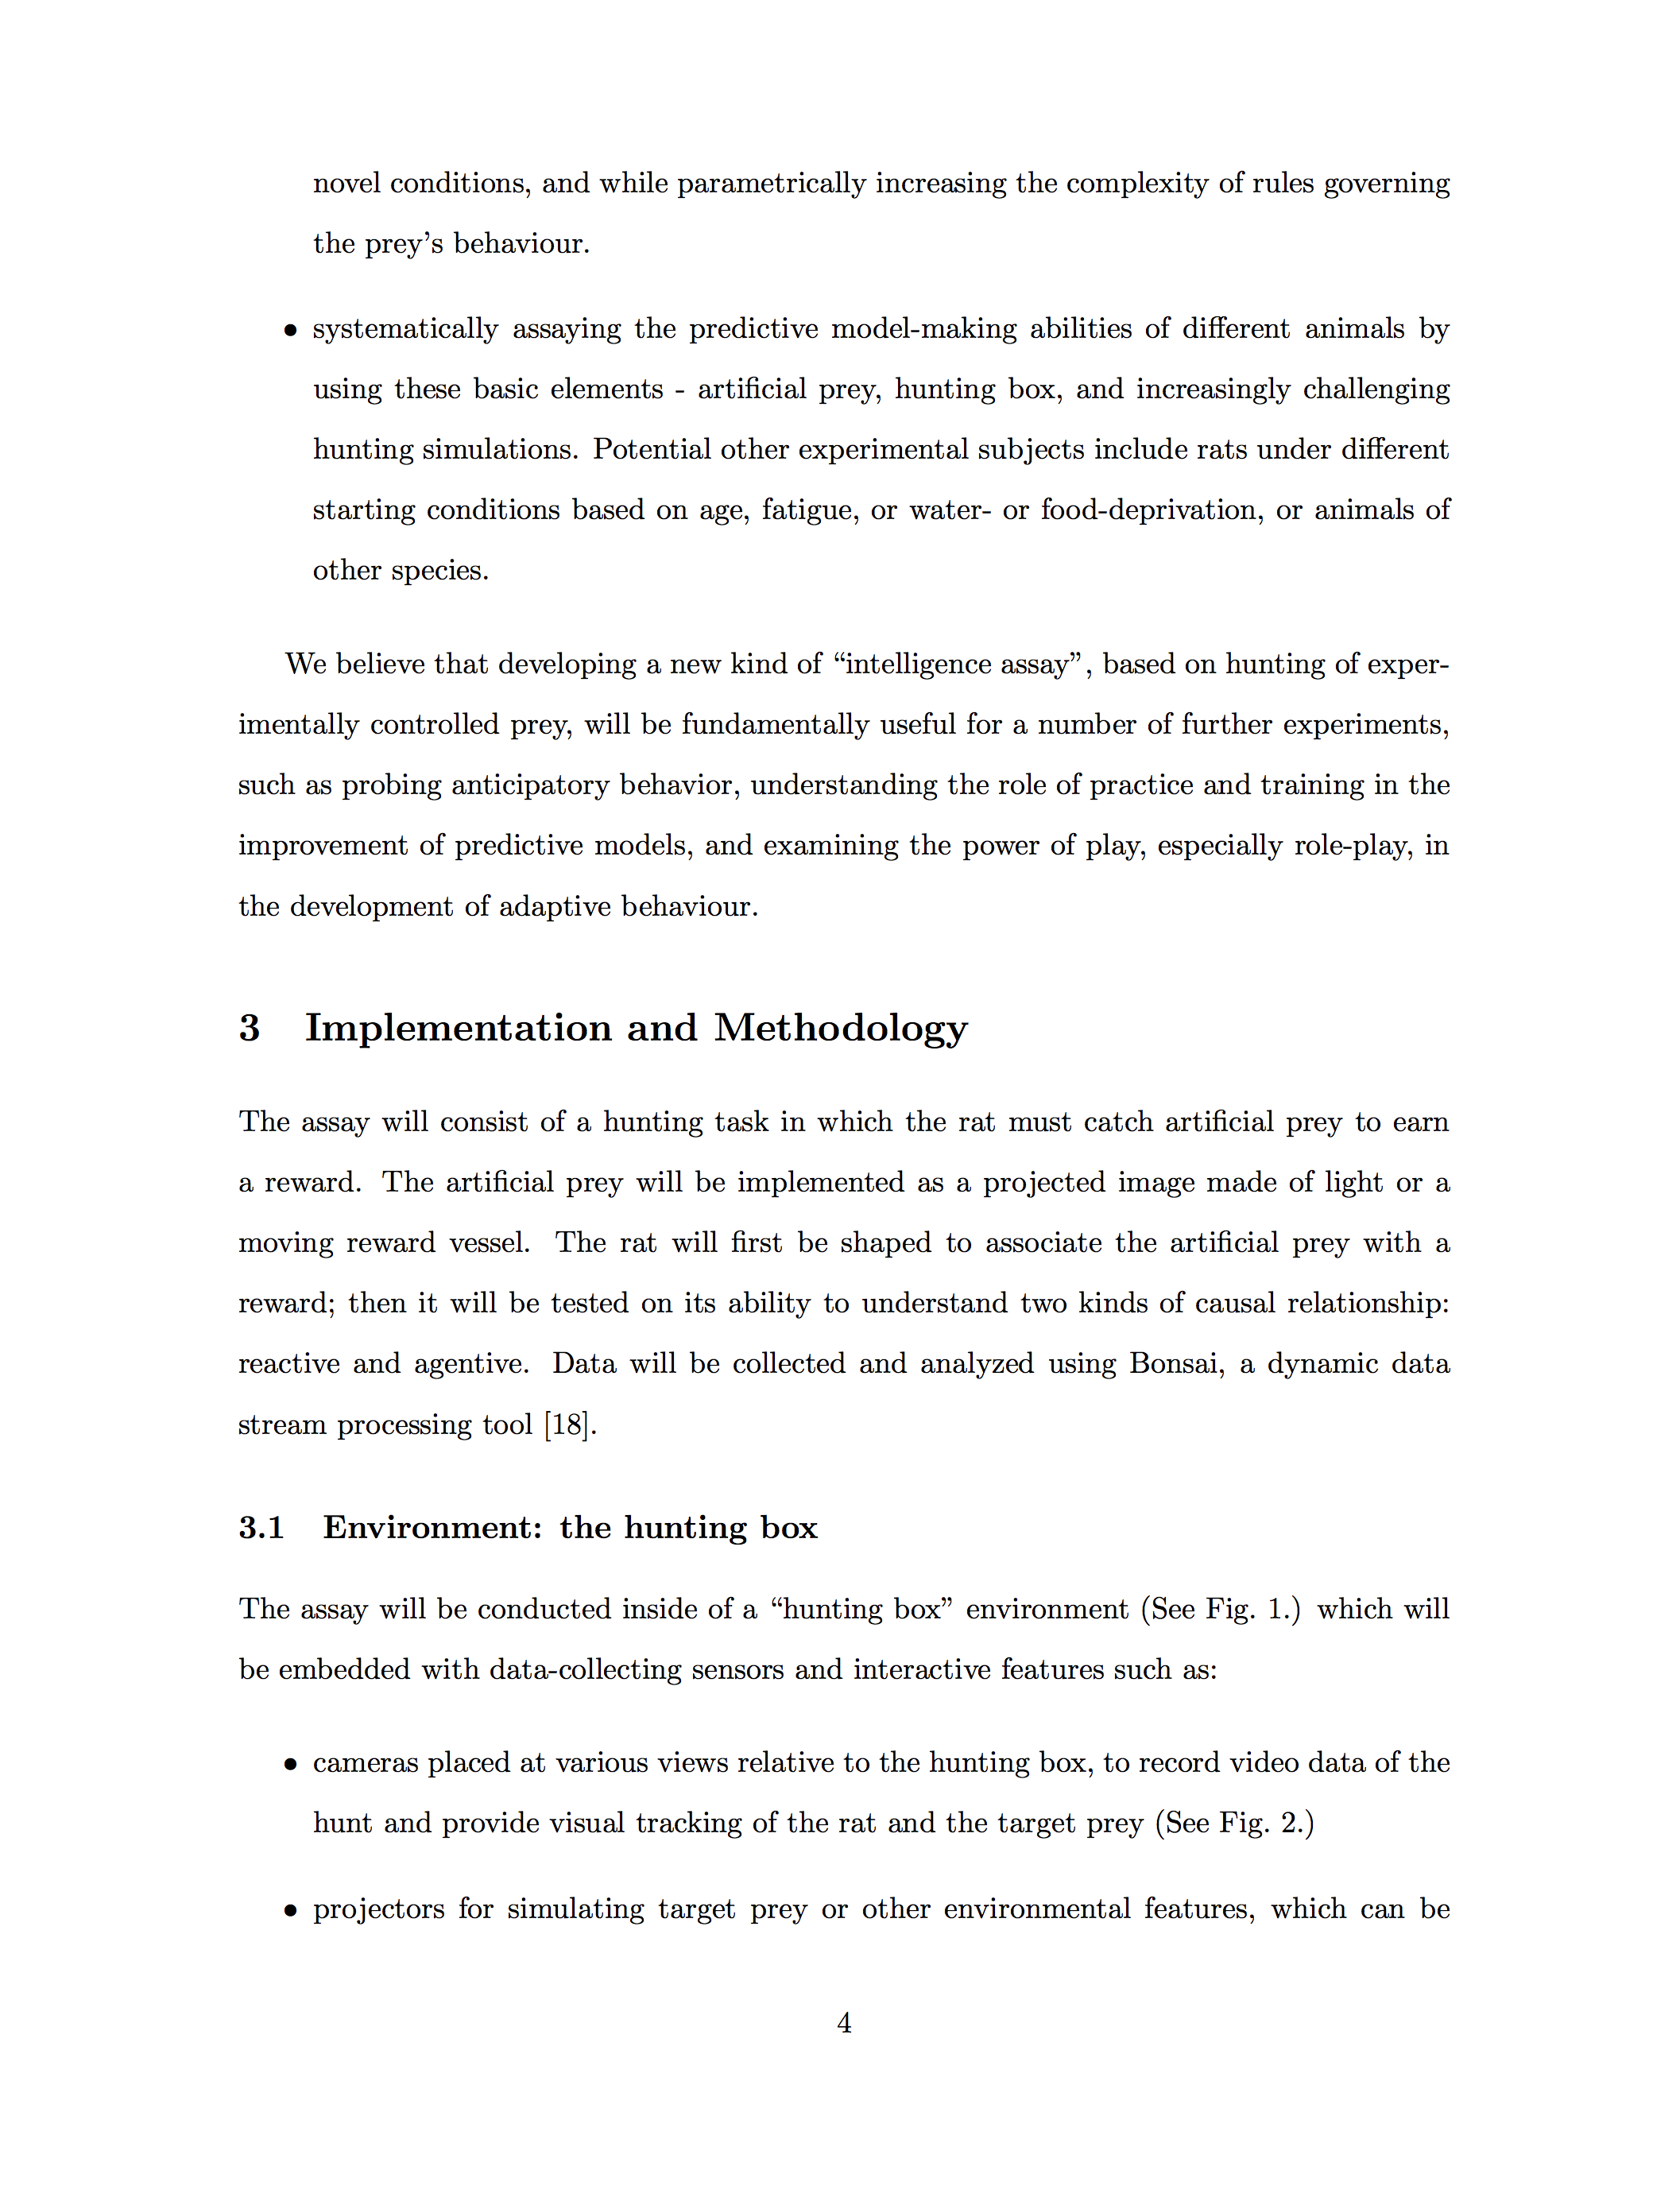 PhD thesis proposal, page 04